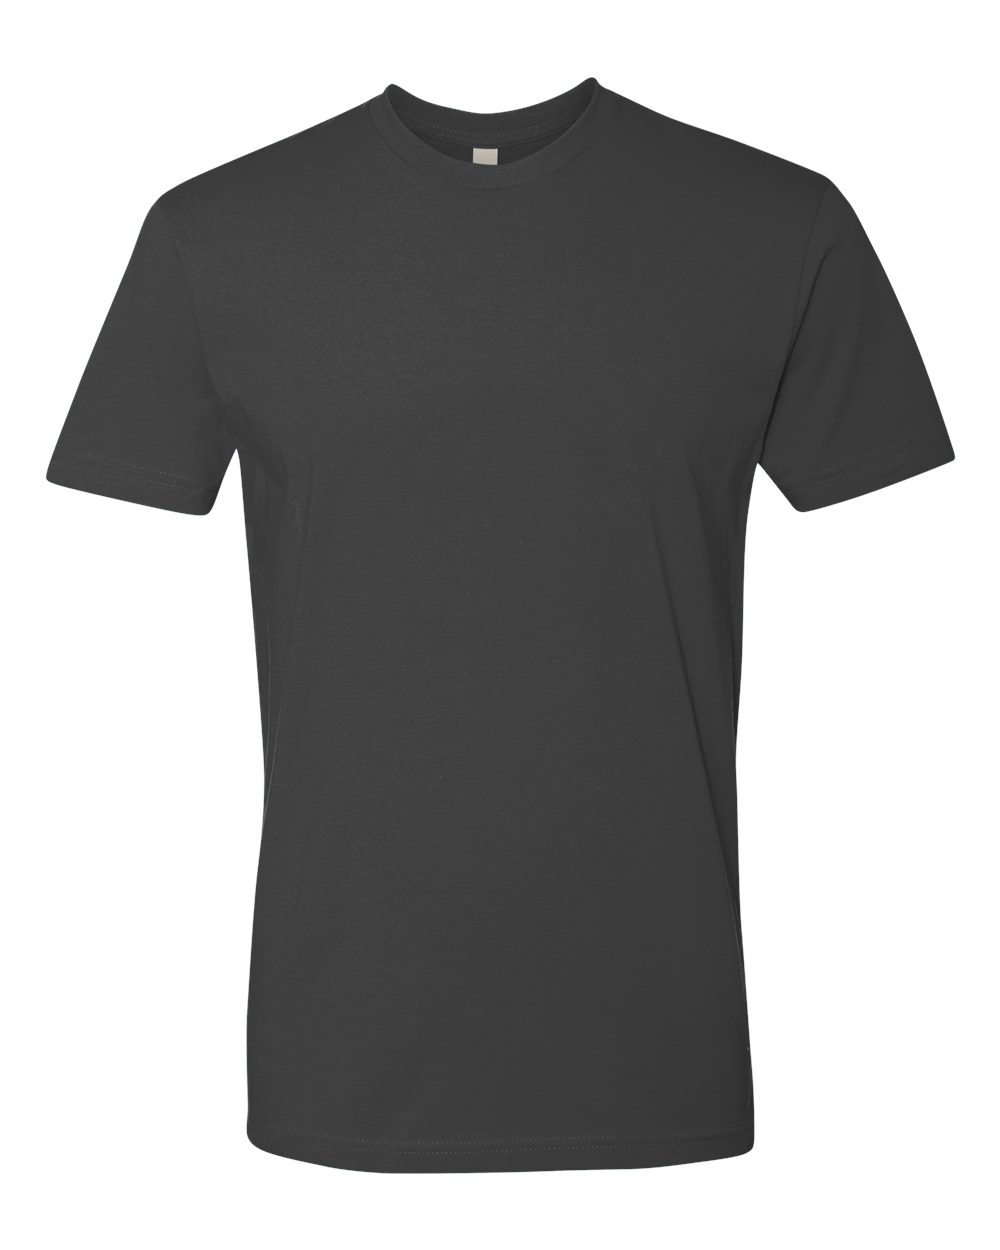 Next Level Apparel - Unisex Tee's 3600 - Charcoal Gray